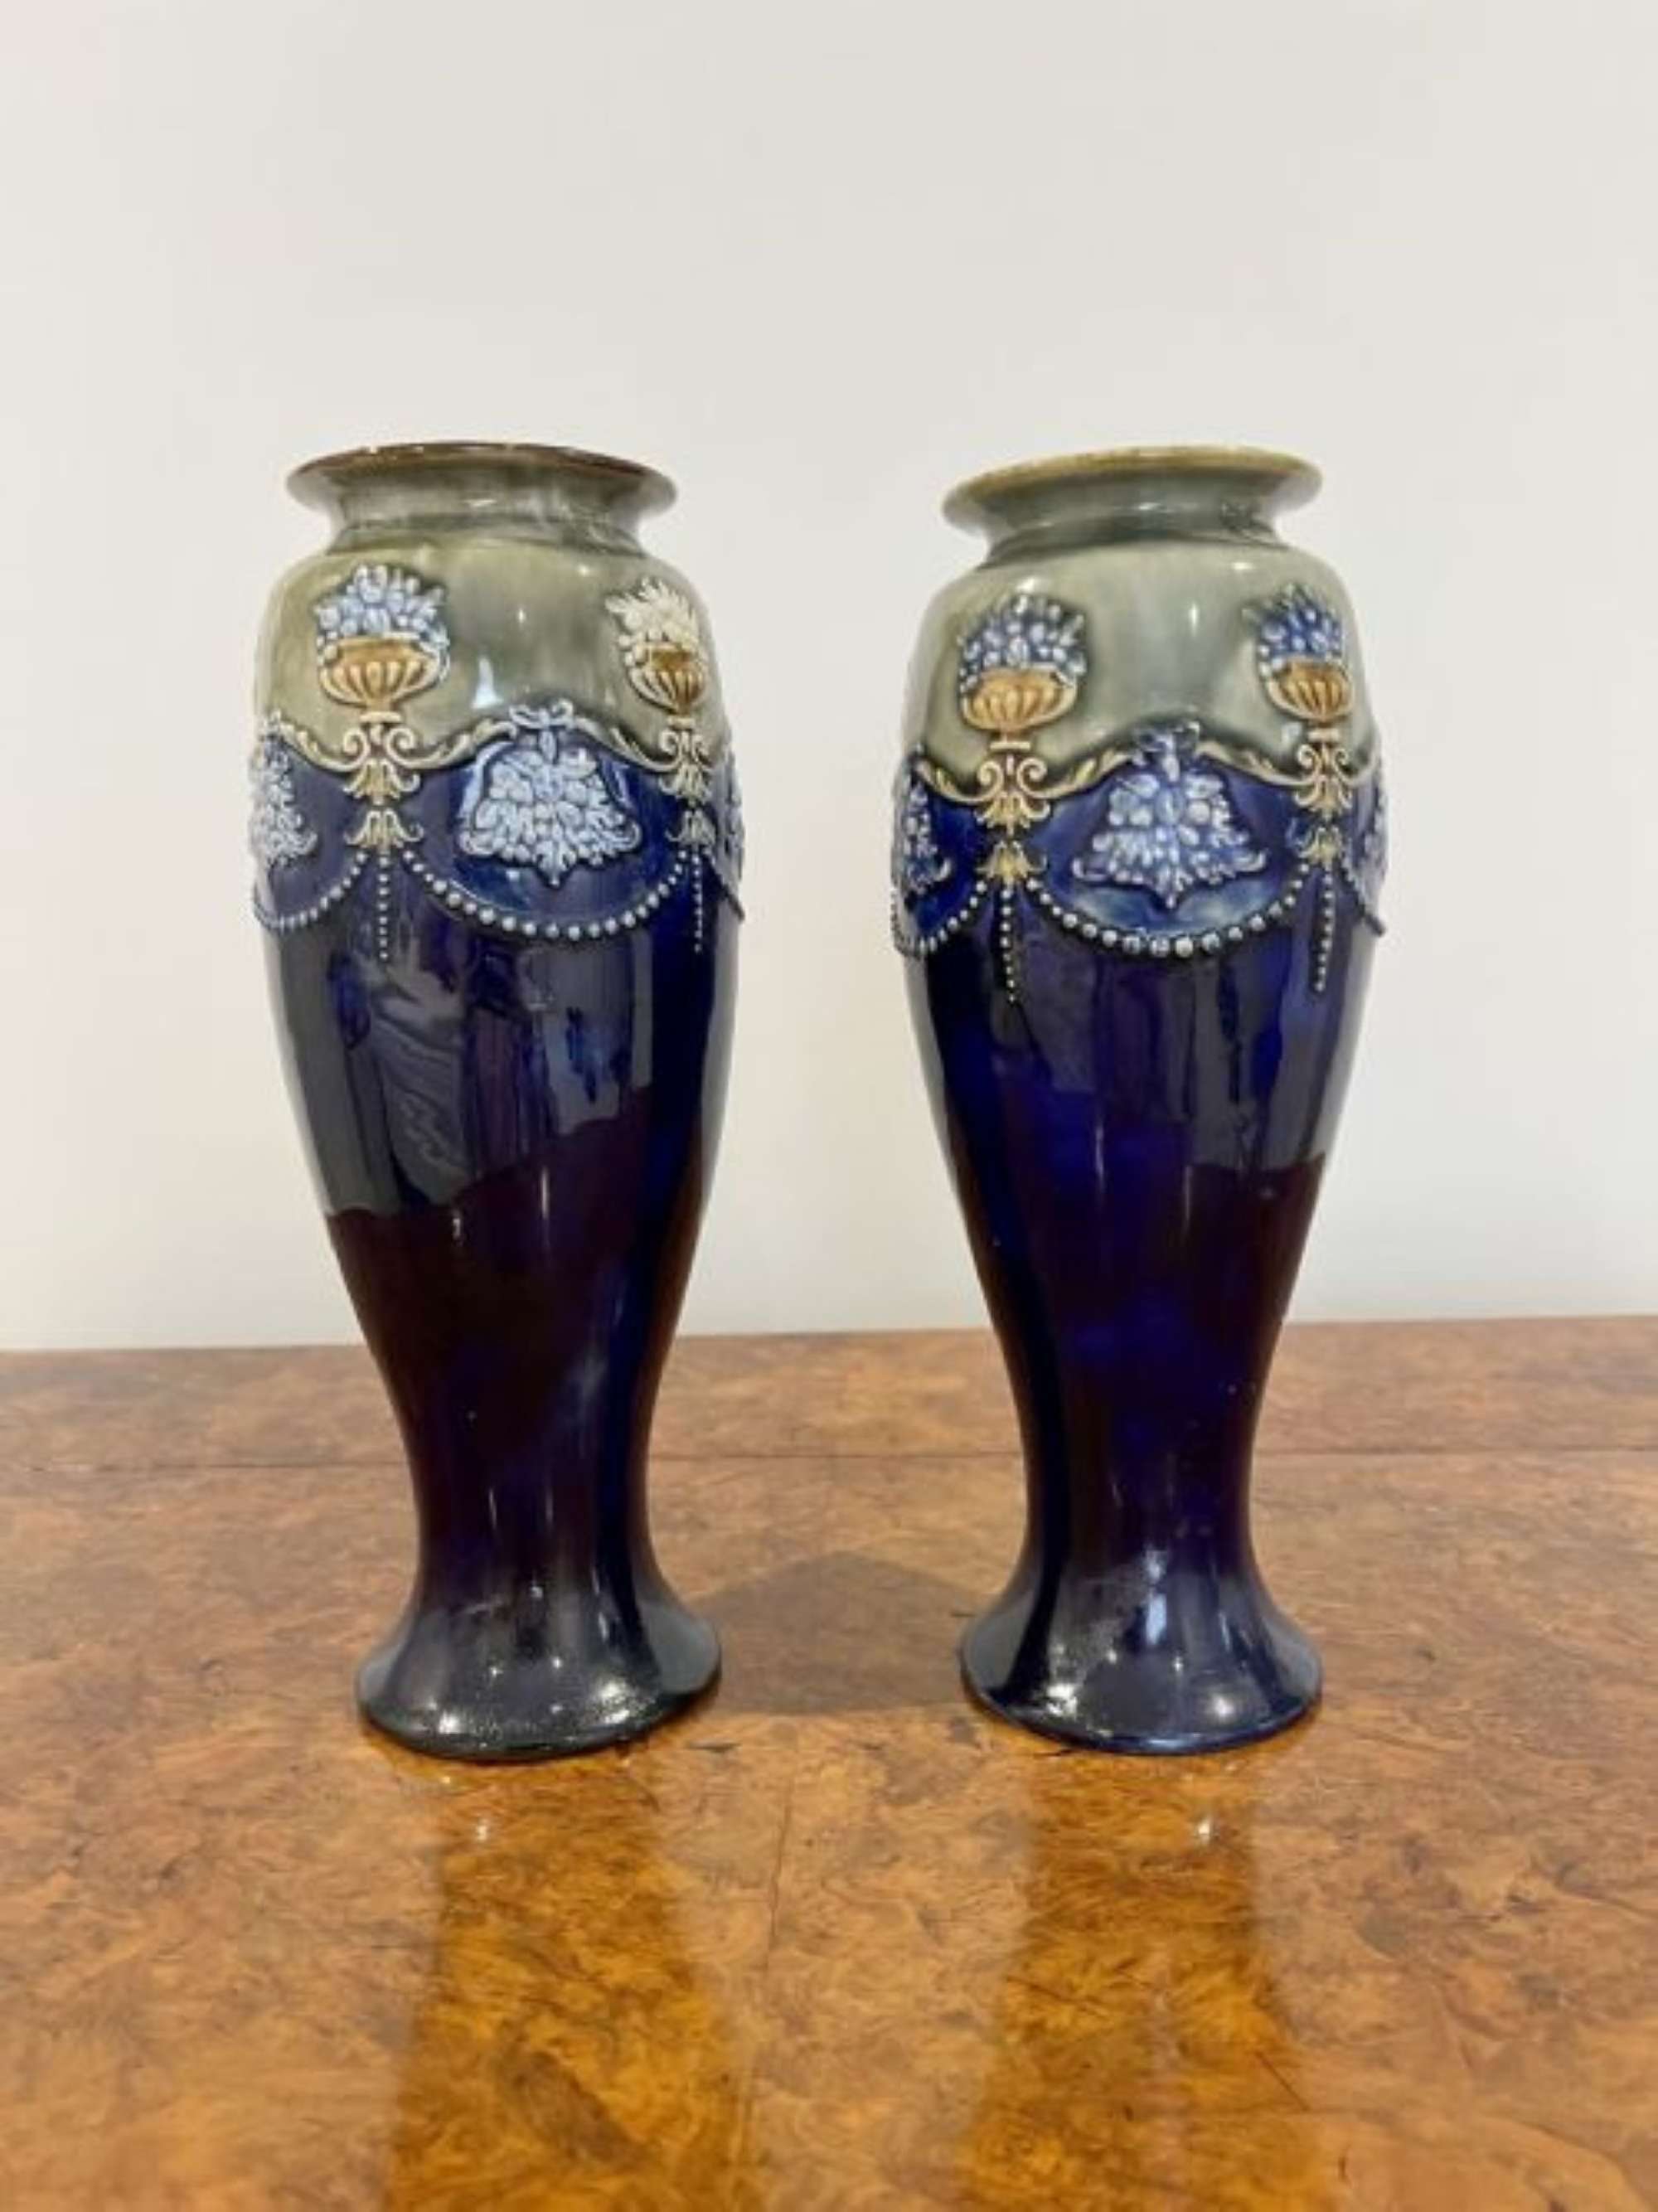 QUALITY PAIR OF ANTIQUE VICTORIAN ROYAL DOULTON VASES